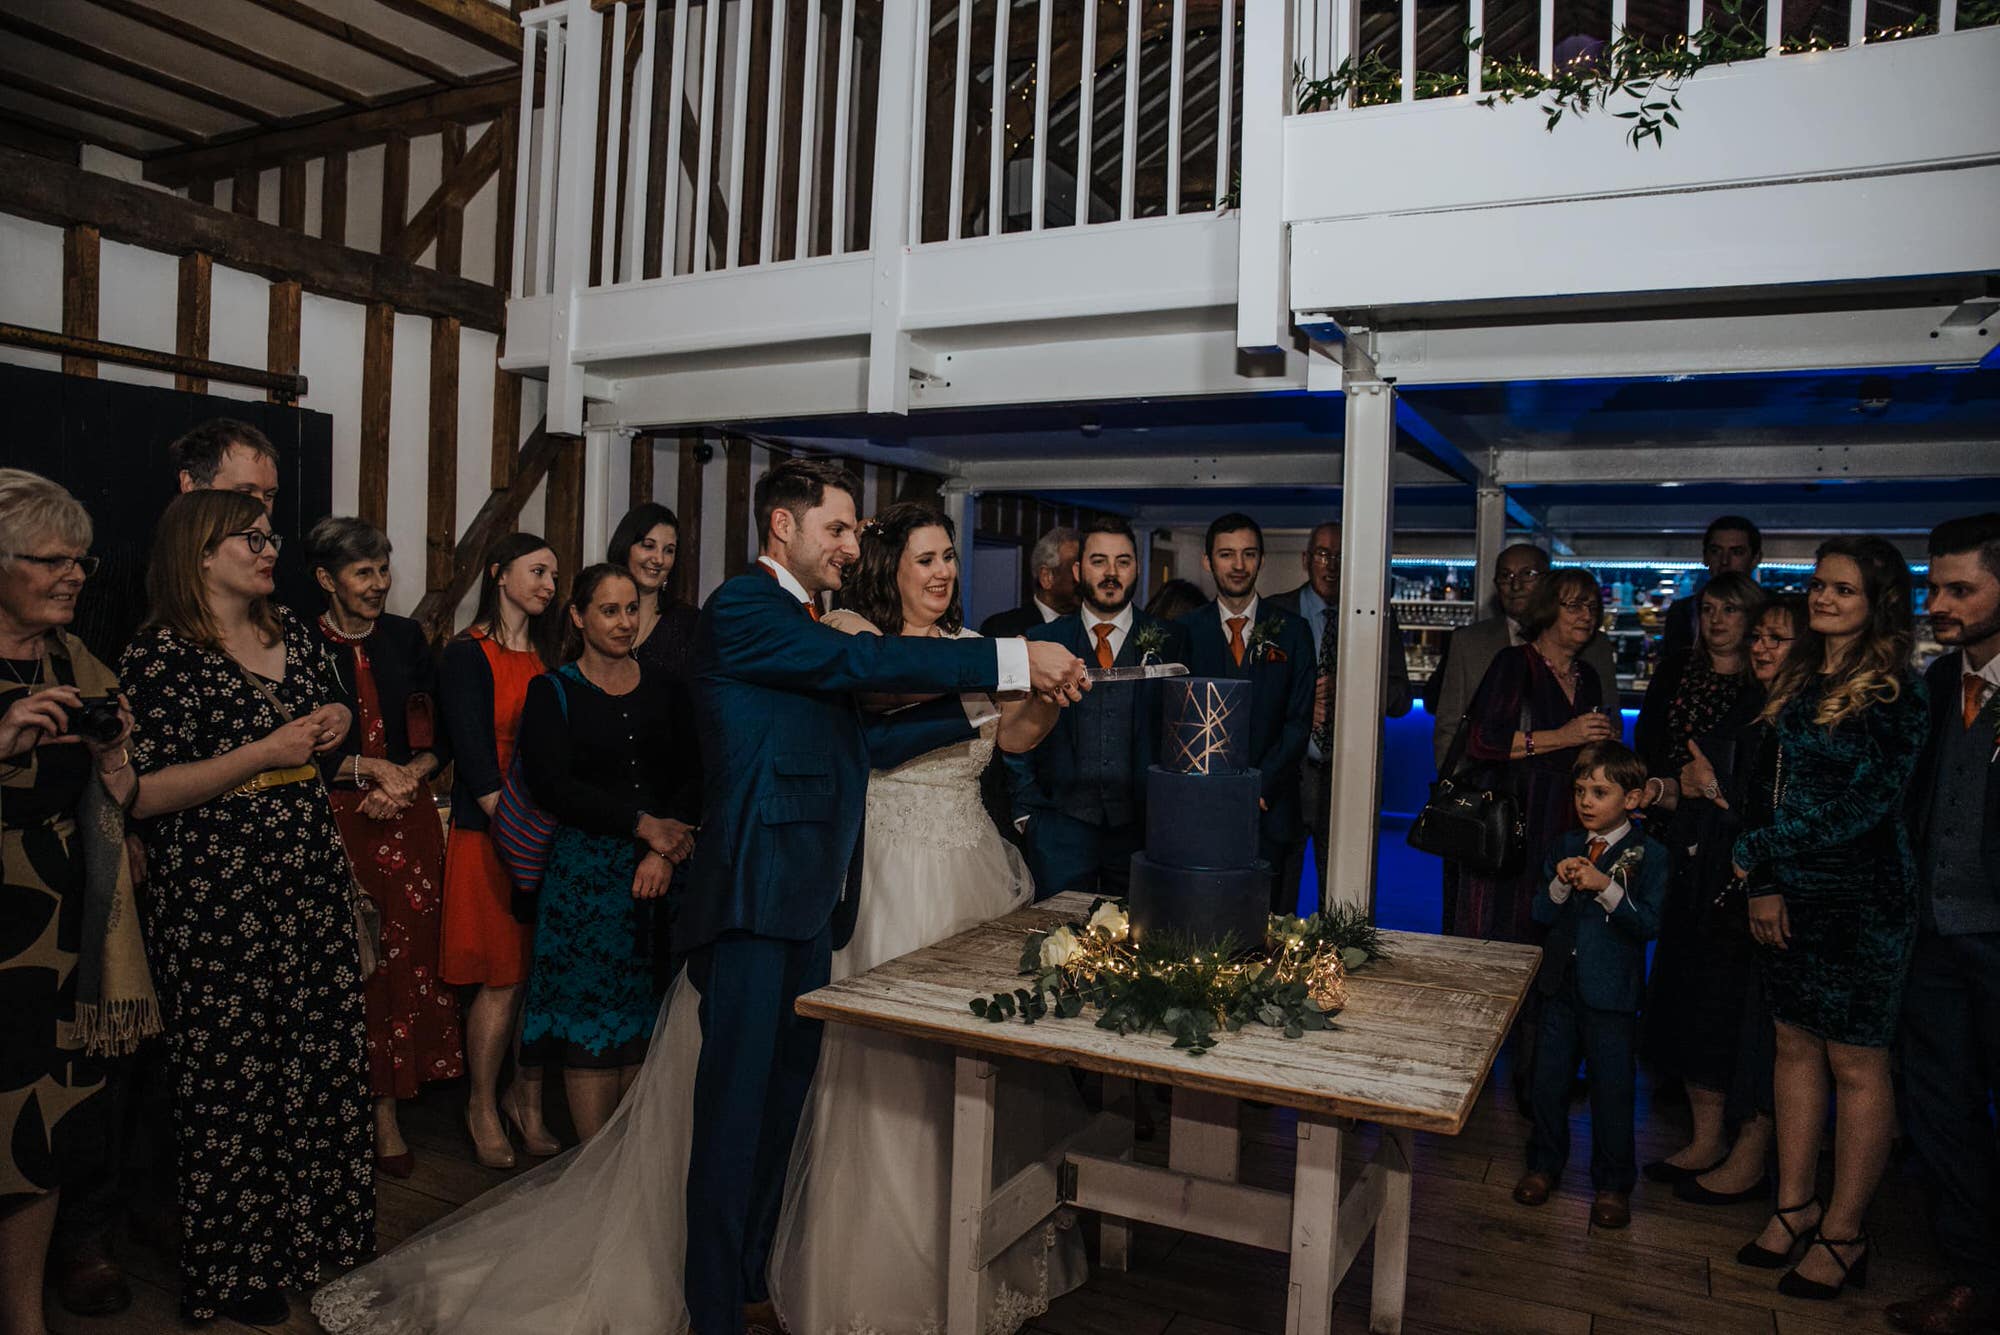 Cake cutting the bride ad groom at the reception Roshni photography The Milling Barn, Bluntswood Hall, Throcking wedding photographer